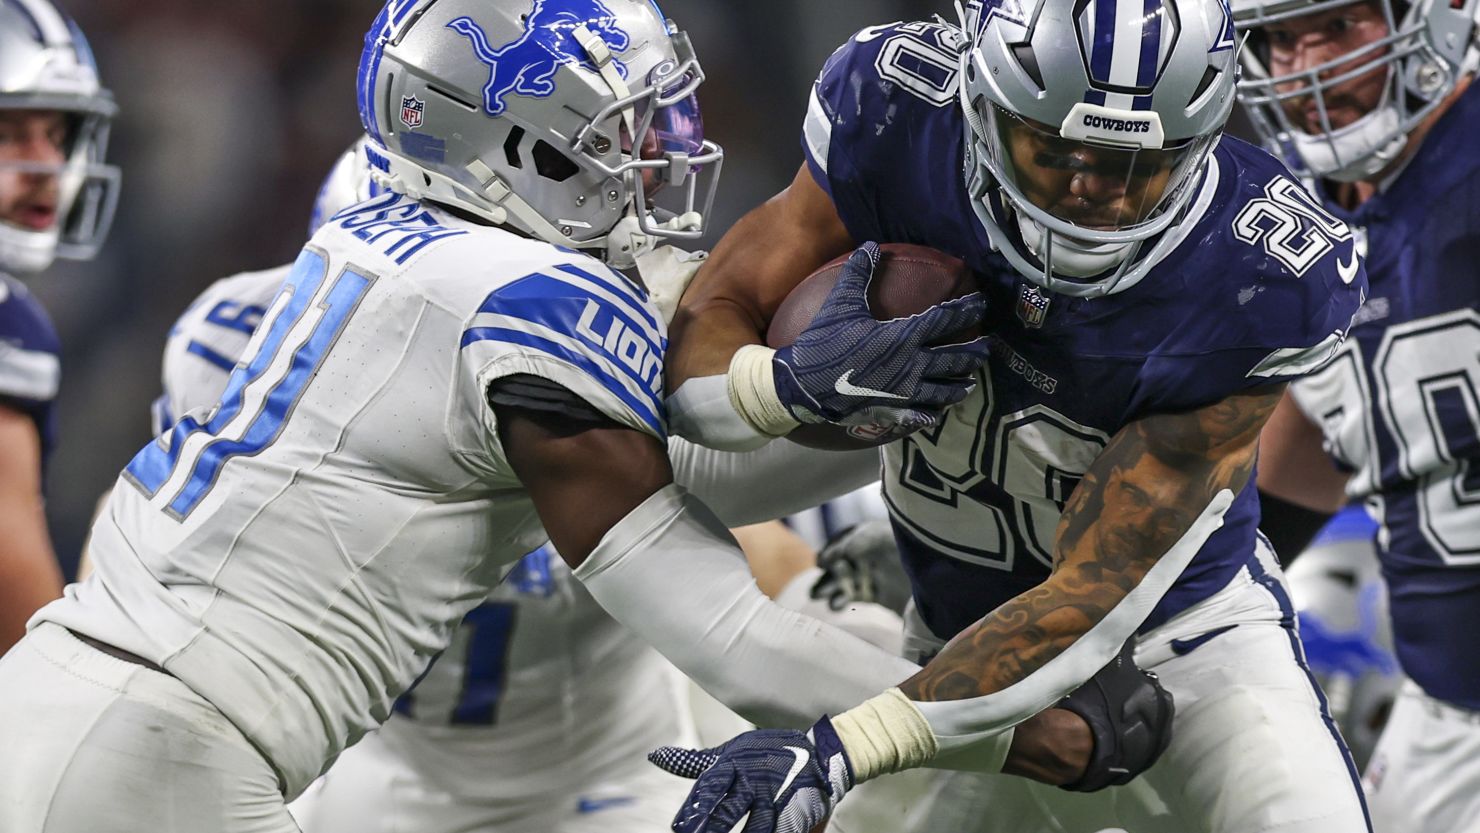 NFL: Dallas Cowboys survive late controversy to take narrow victory over Detroit Lions | CNN